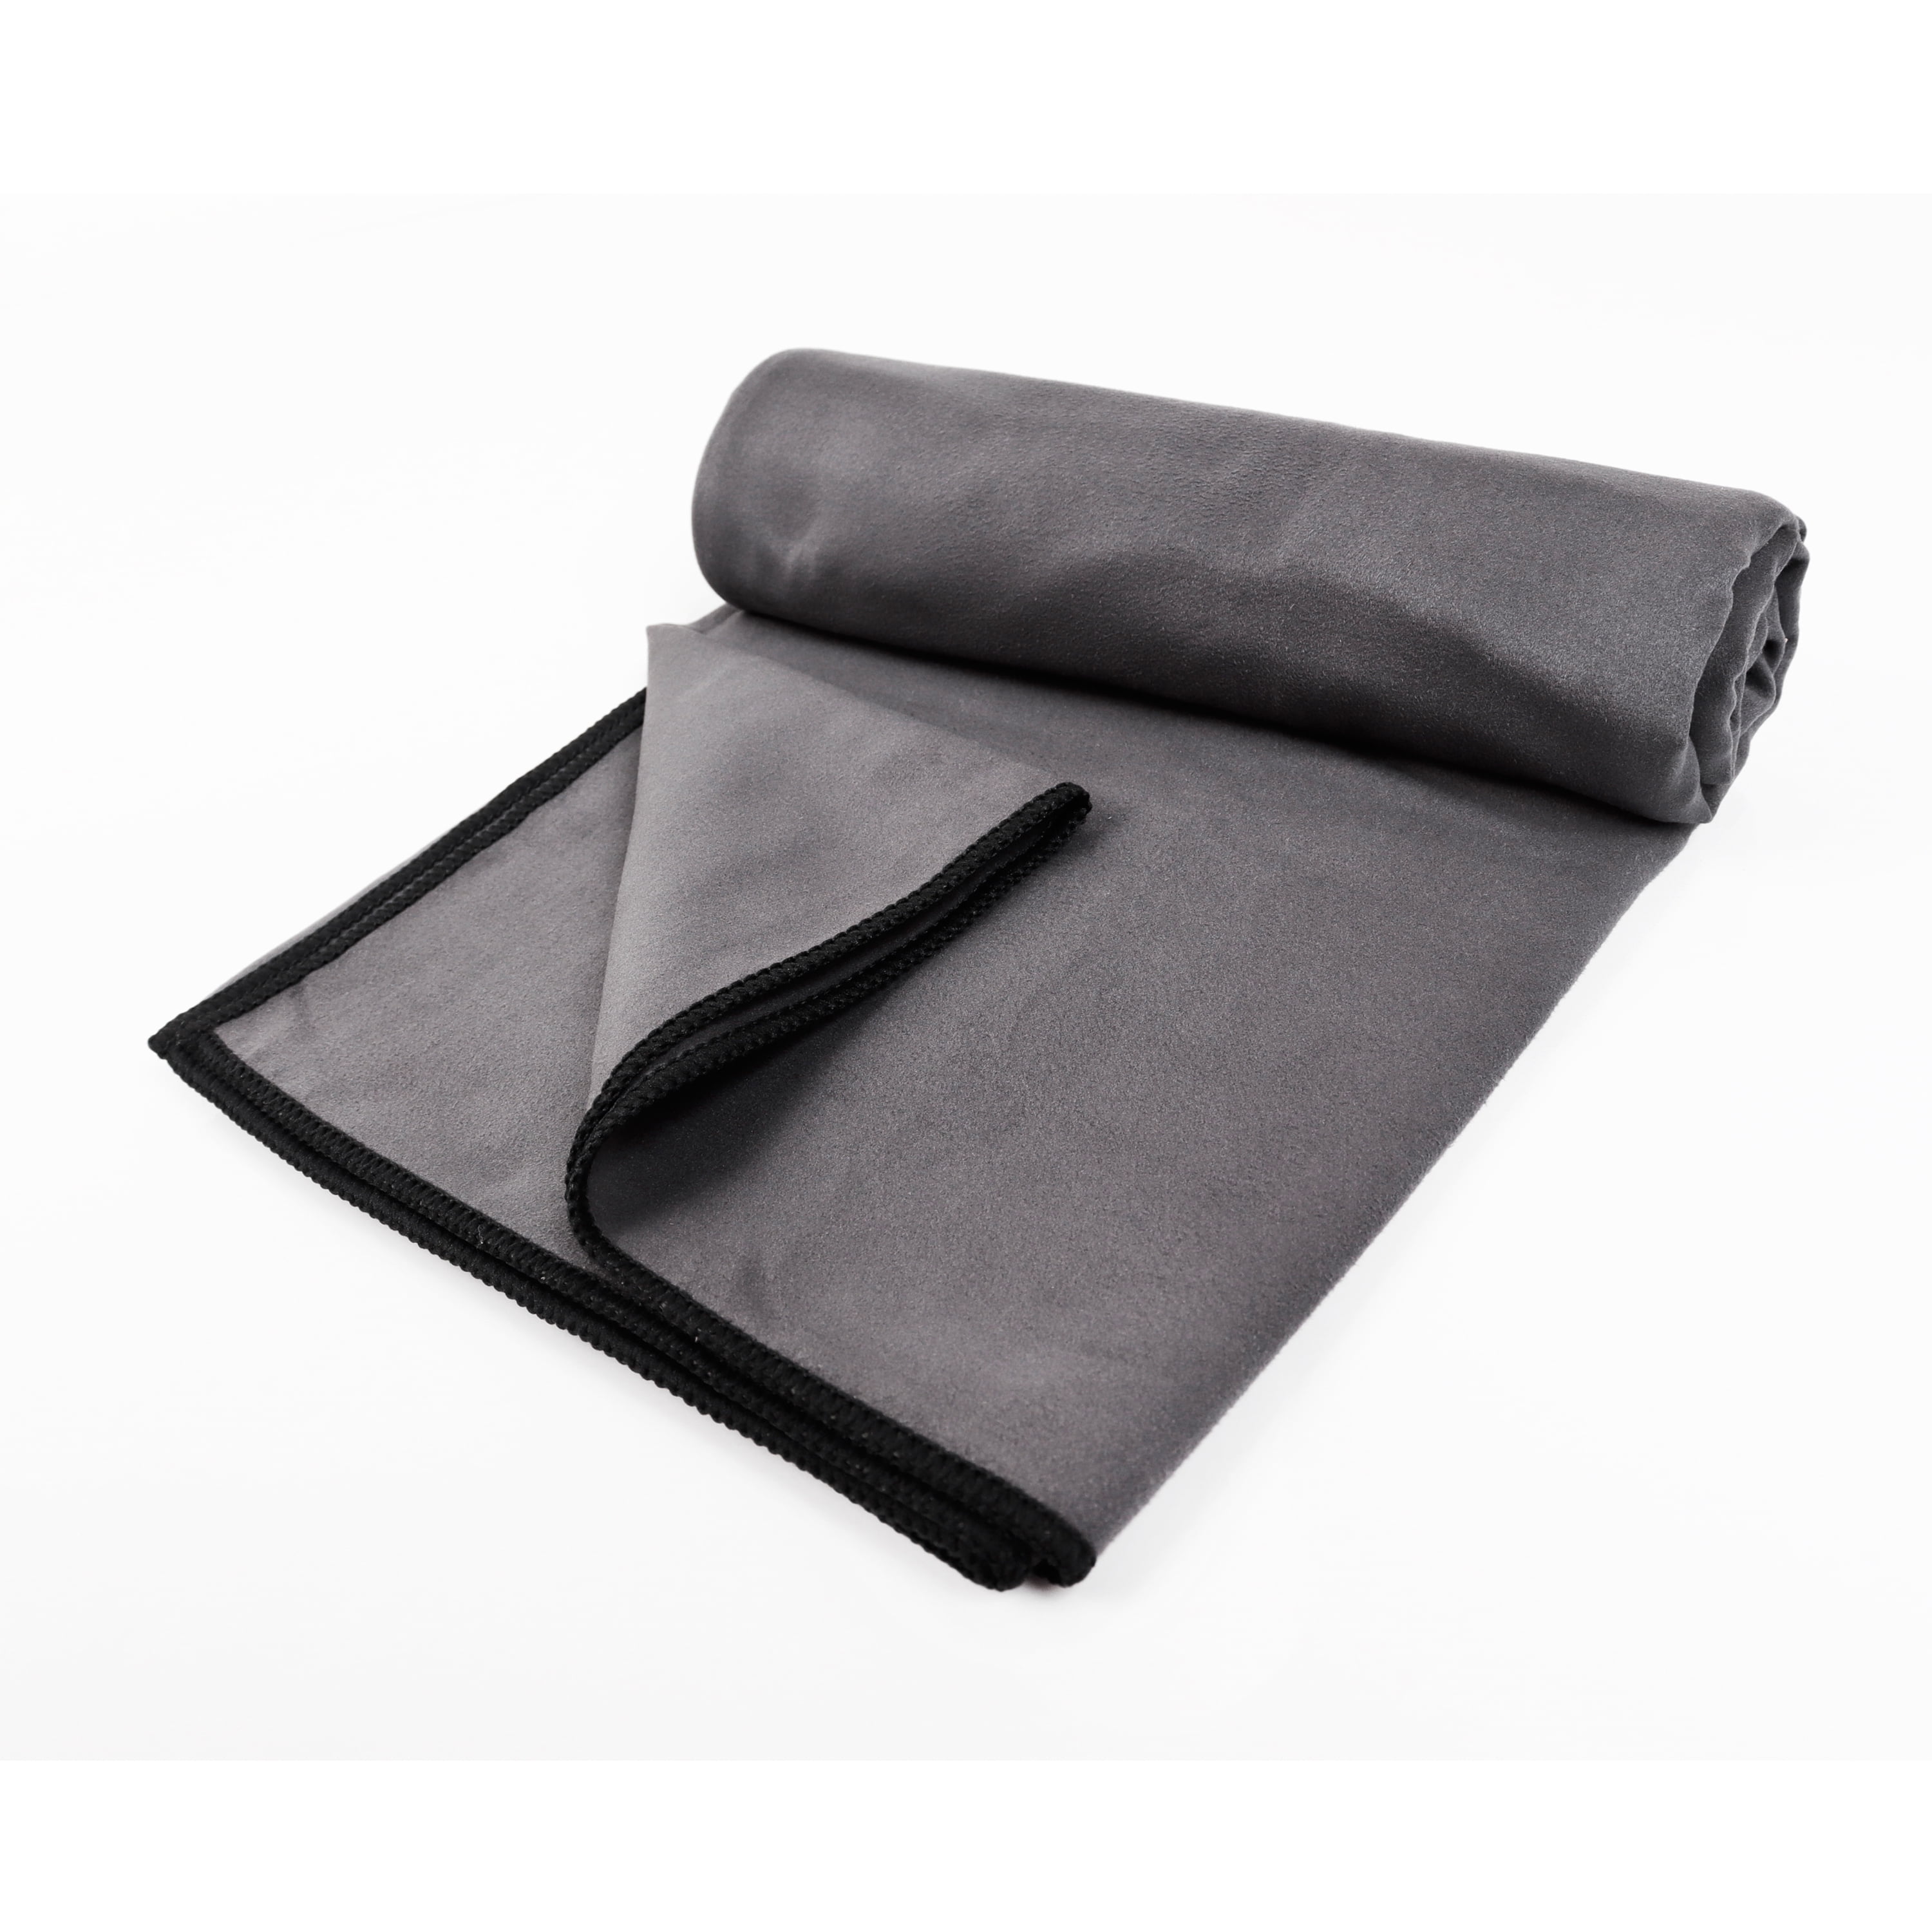 Athletic Works Yoga Mat Towel, 72 In. x 24 In. ,Dark Gray, Super-Absorbent,  Soft Microfiber, Non-Slip, Quick Dry 